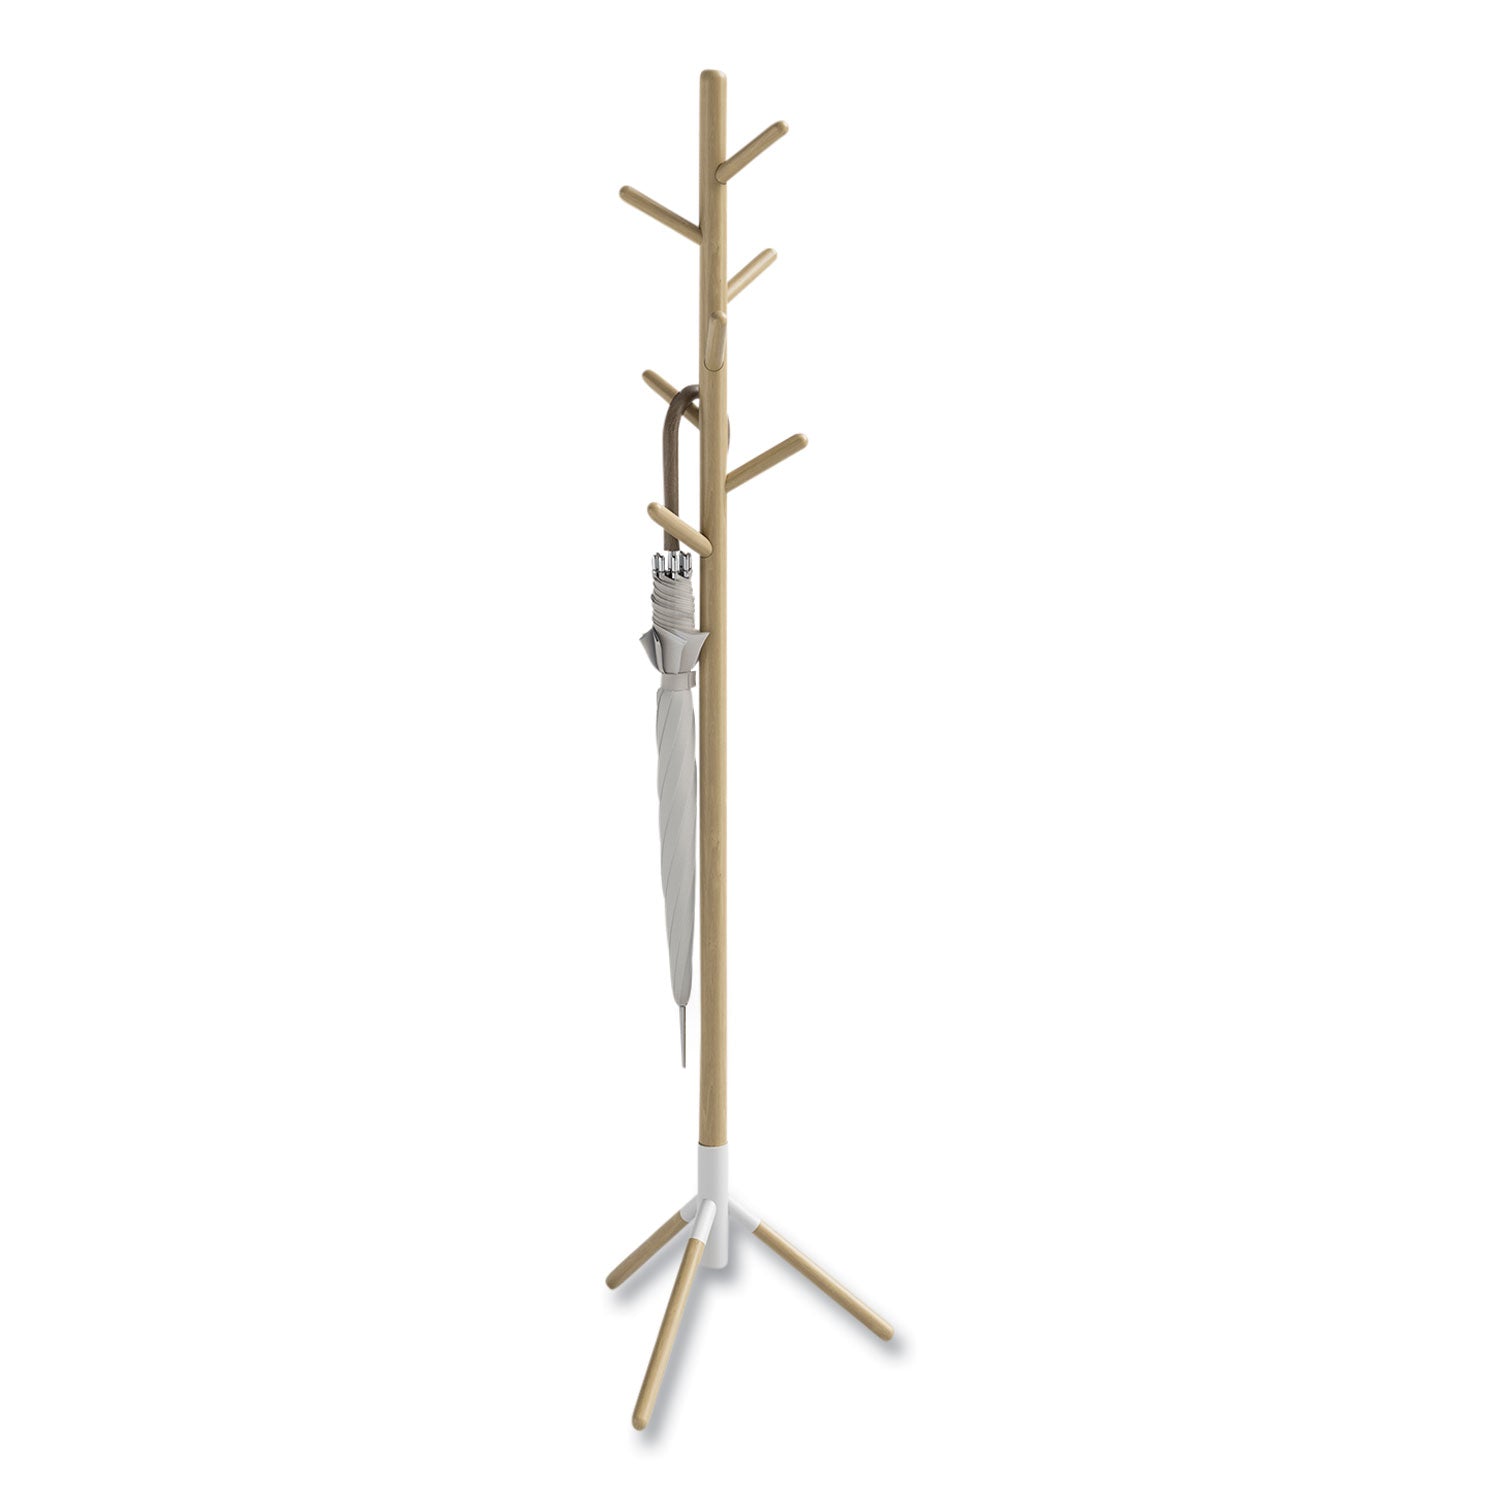 resi-standing-coat-tree-6-hook-1725w-x-1725d-x-695h-white-ships-in-1-3-business-days_saf4265wh - 2